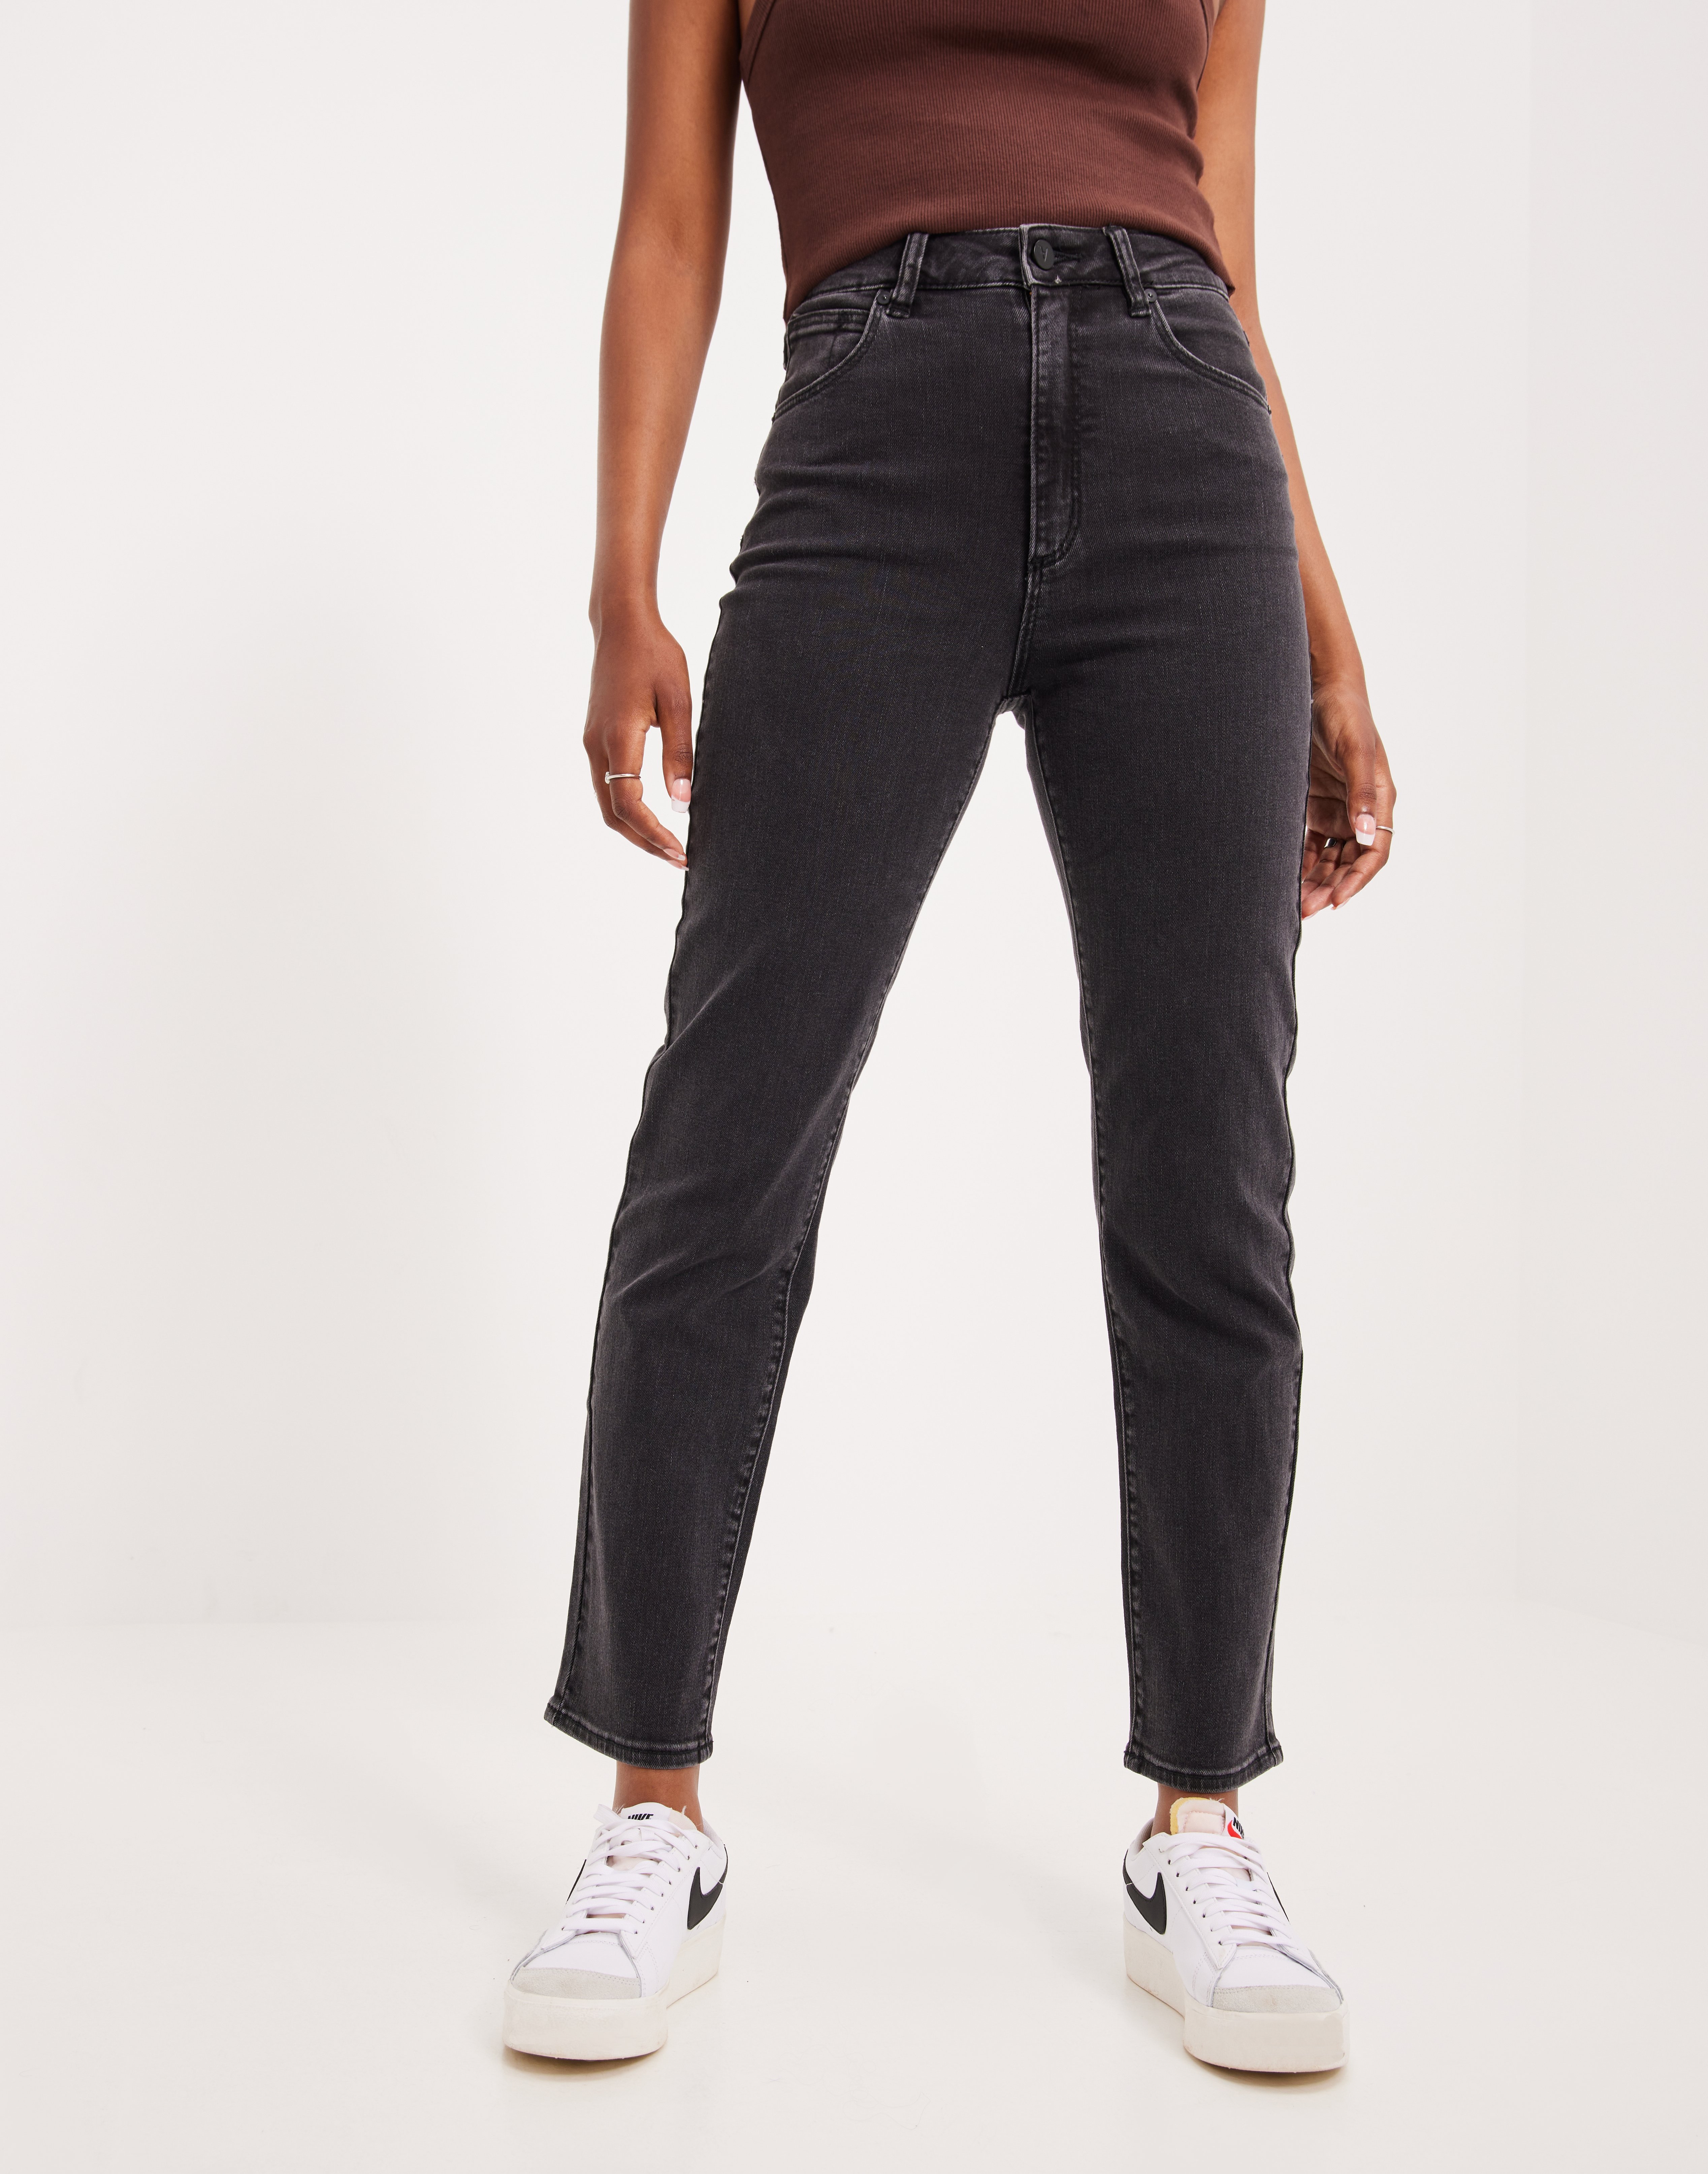 Abrand Jeans - High waisted jeans - A 94 High Slim 90210 - Jeans